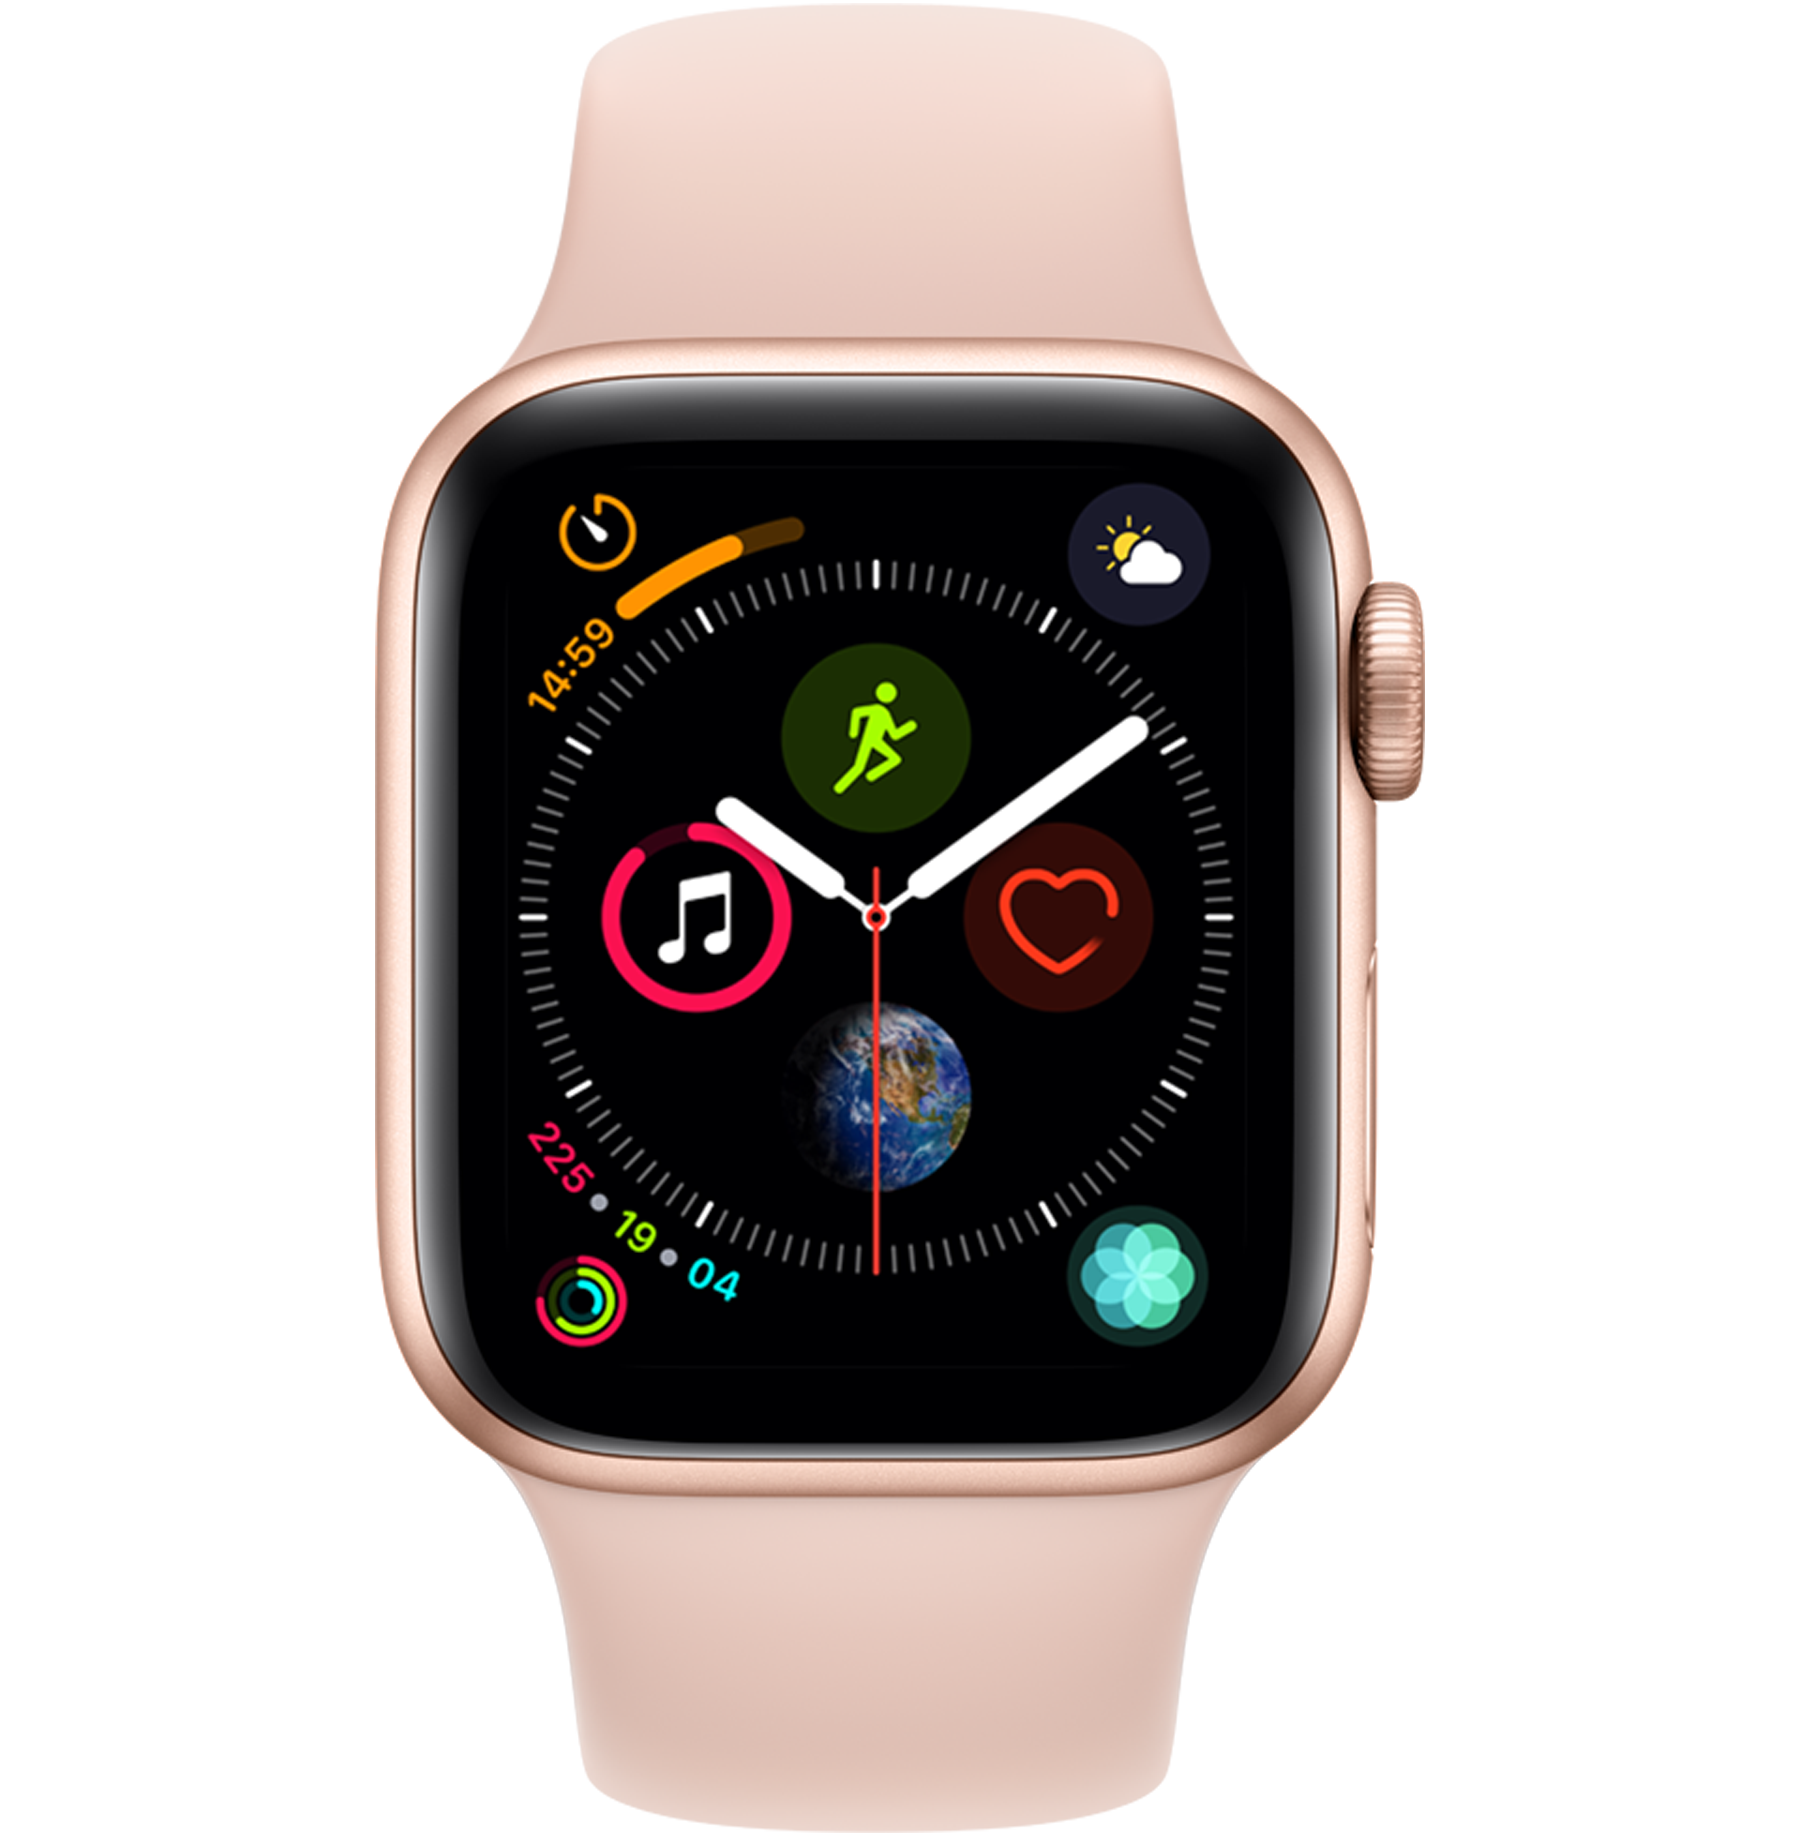 Apple Watch | Apple smartwatch and accessories | Rogers